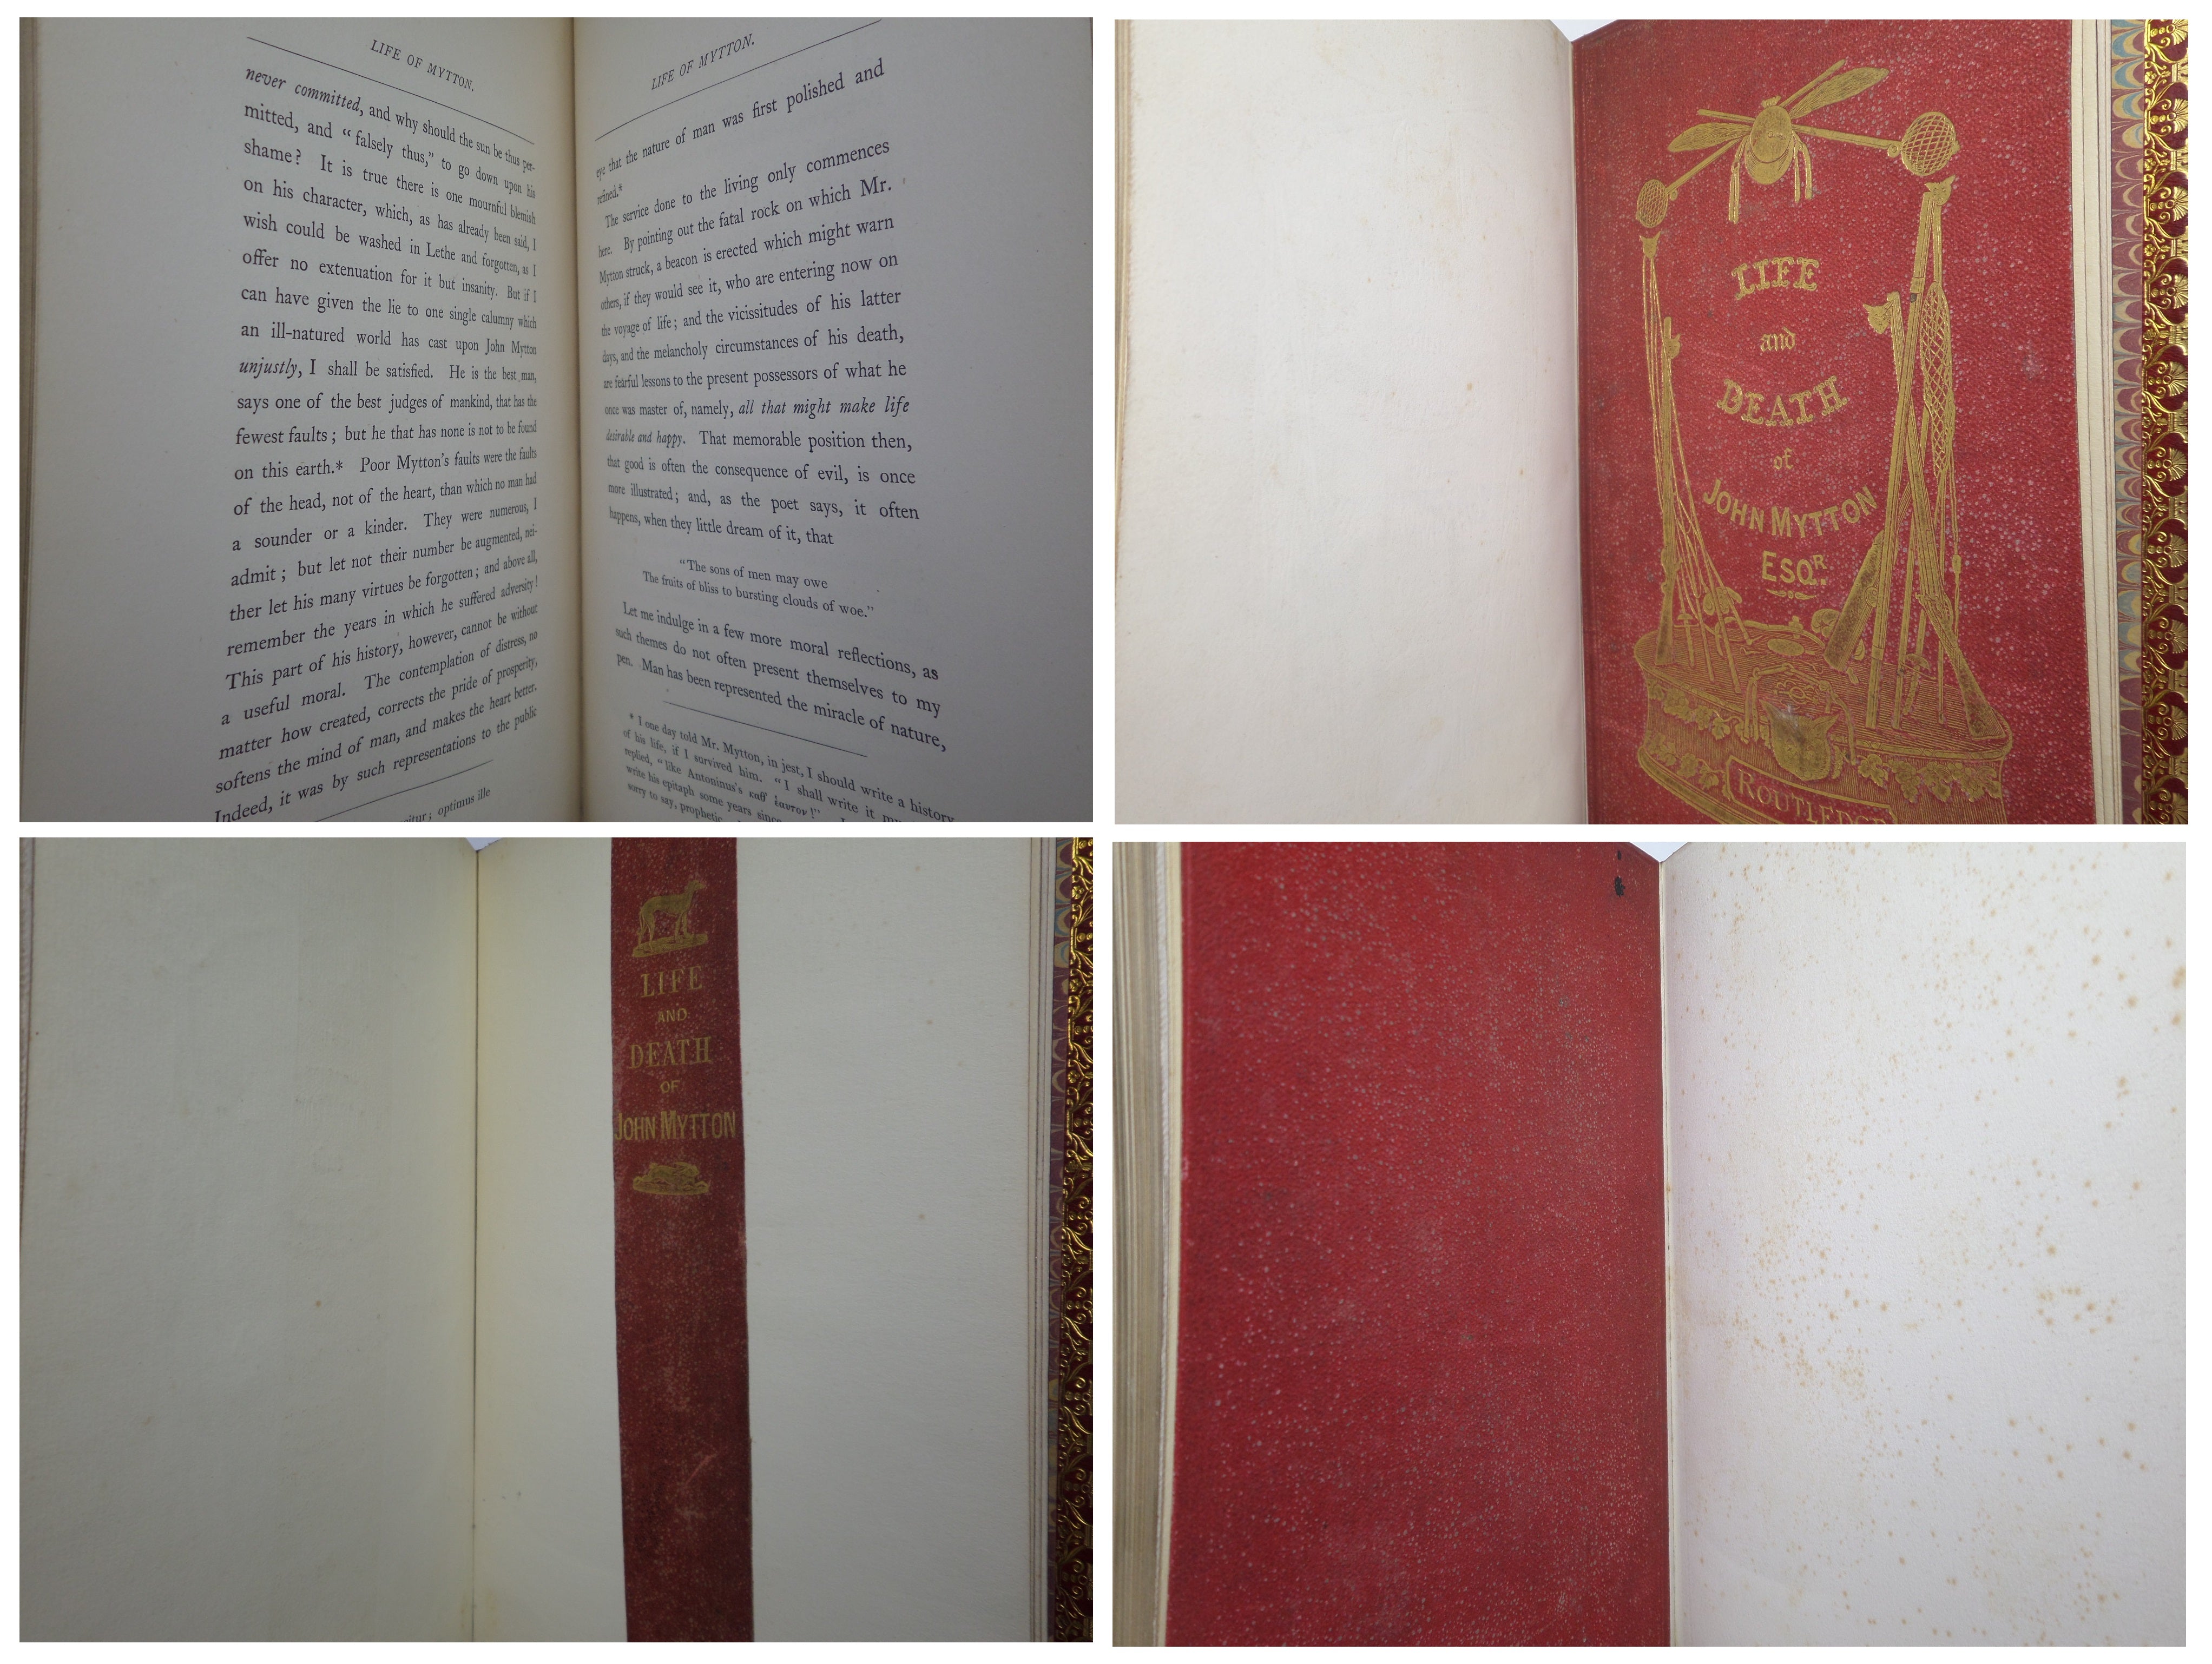 THE LIFE OF JOHN MYTTON BY NIMROD 1869 FOURTH EDITION IN FINE MOROCCO BINDING